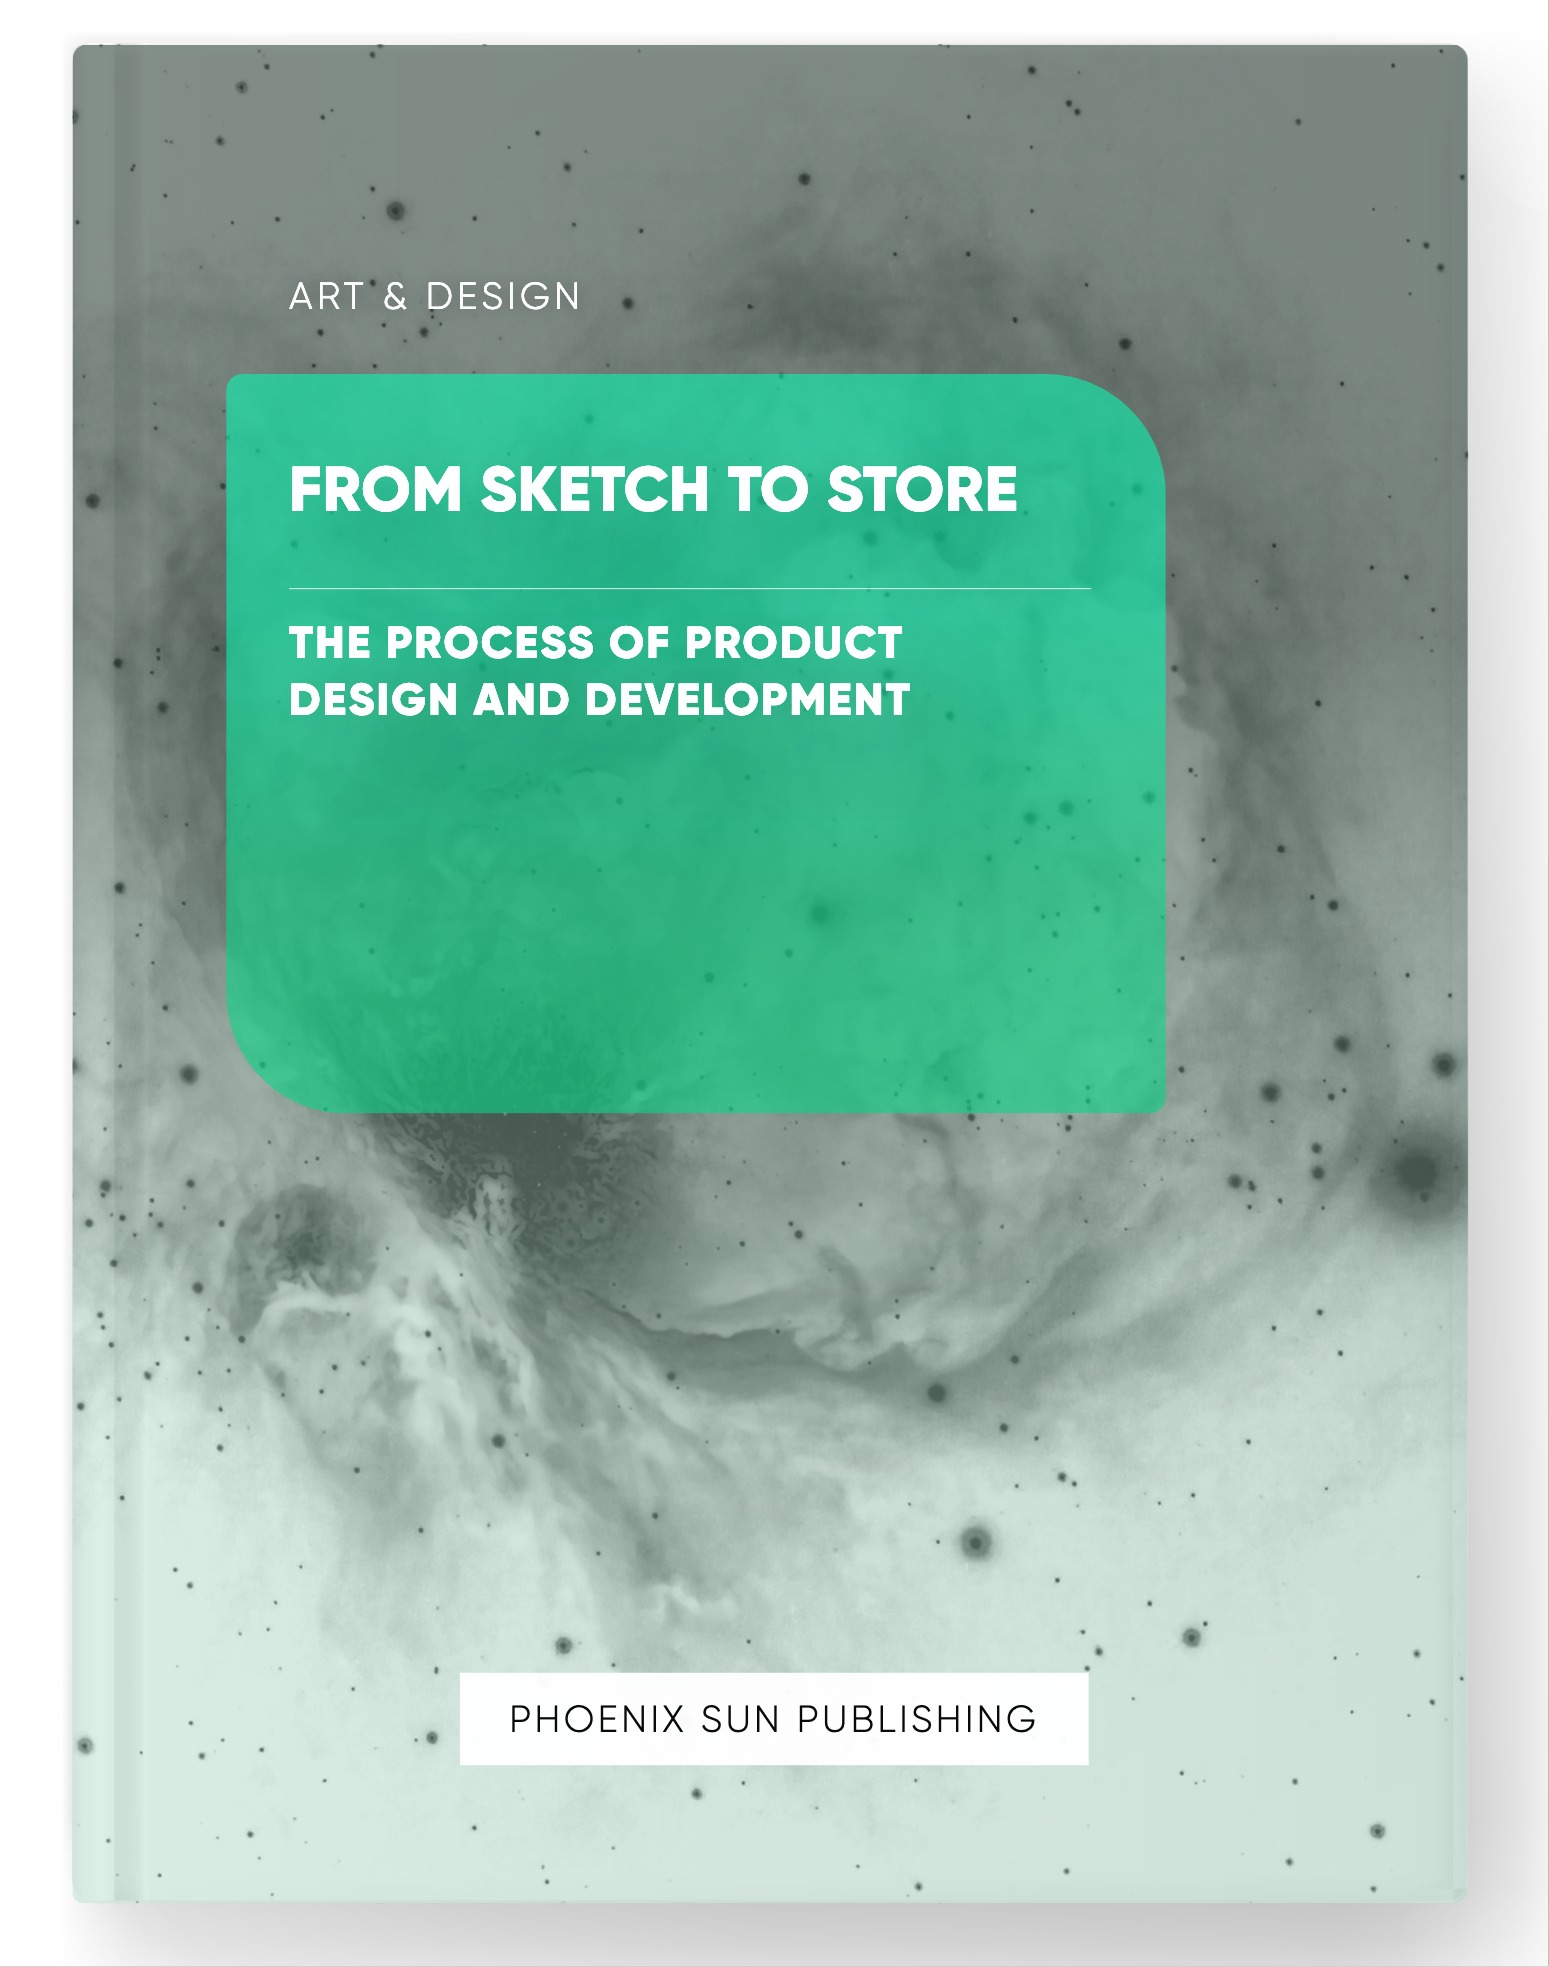 From Sketch to Store – The Process of Product Design and Development